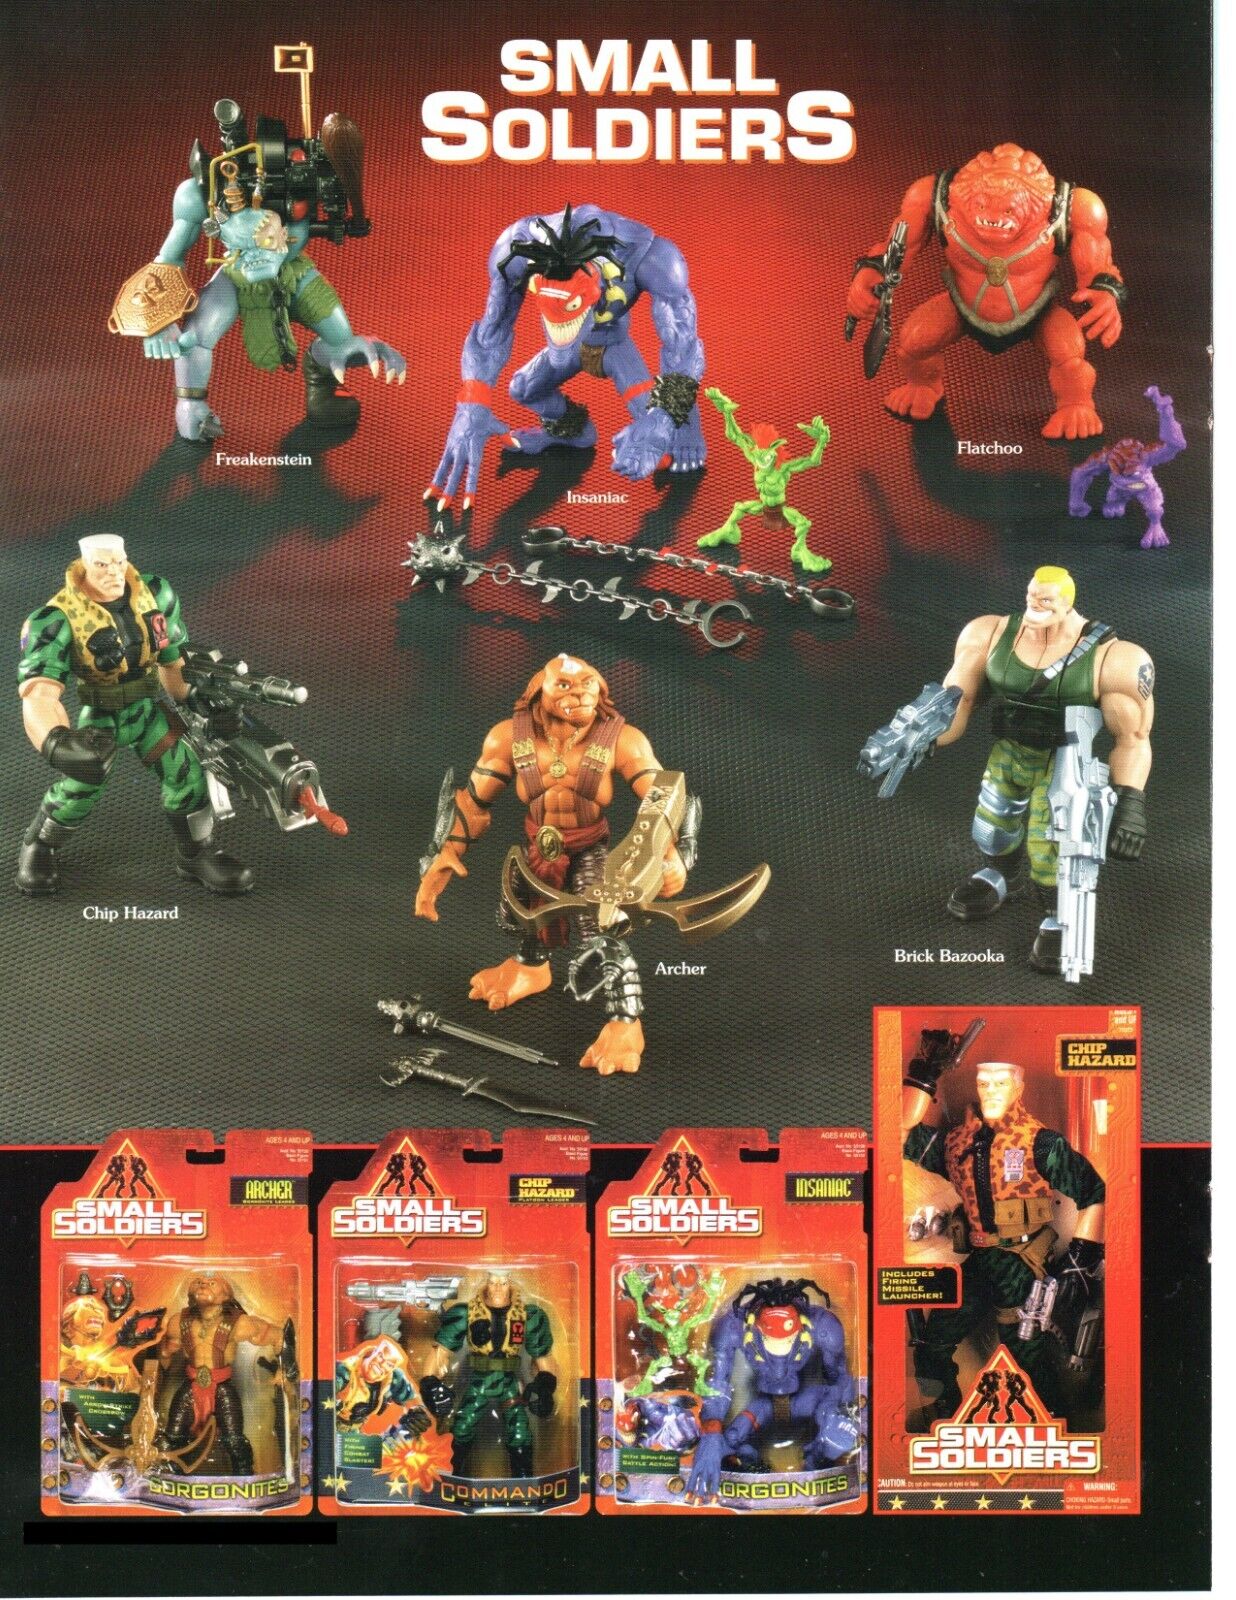 1998 SMALL SOLDIERS Movie Action Figures Toy PRINT AD - ARCHER, INSANIAC, CHIP